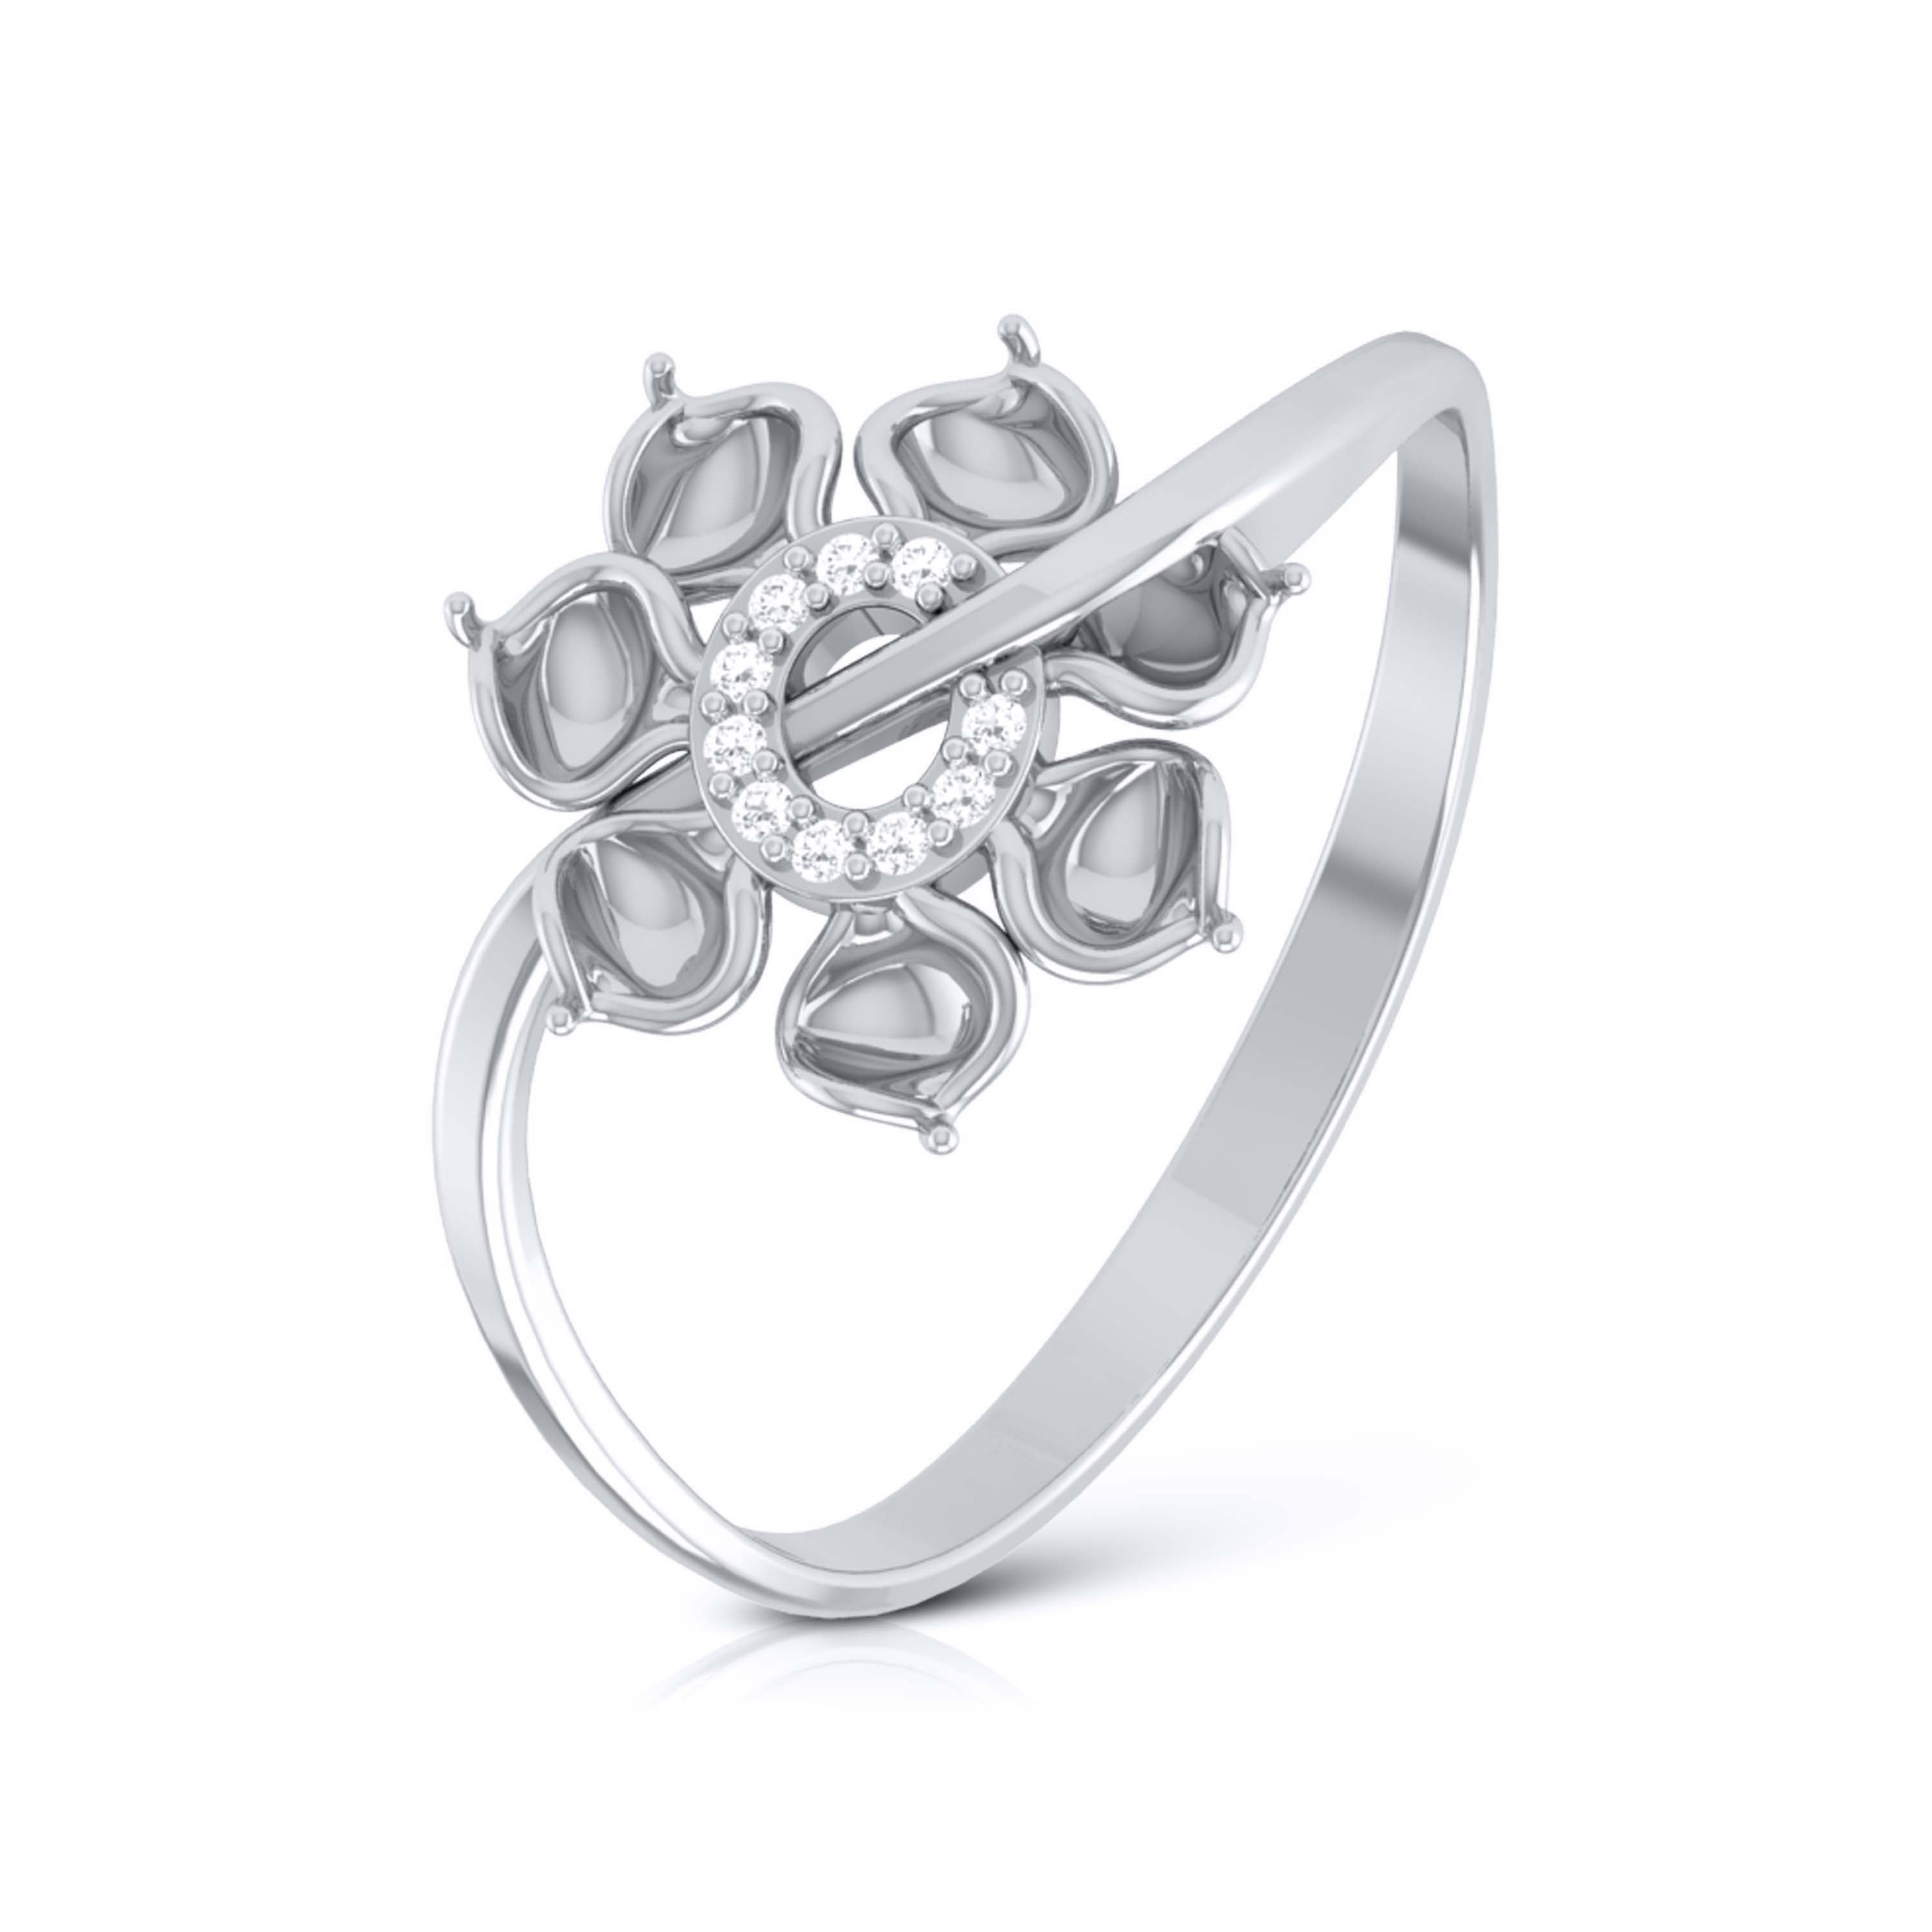 Best Place To Buy Platinum Wedding Bands | Couple Ring Design|